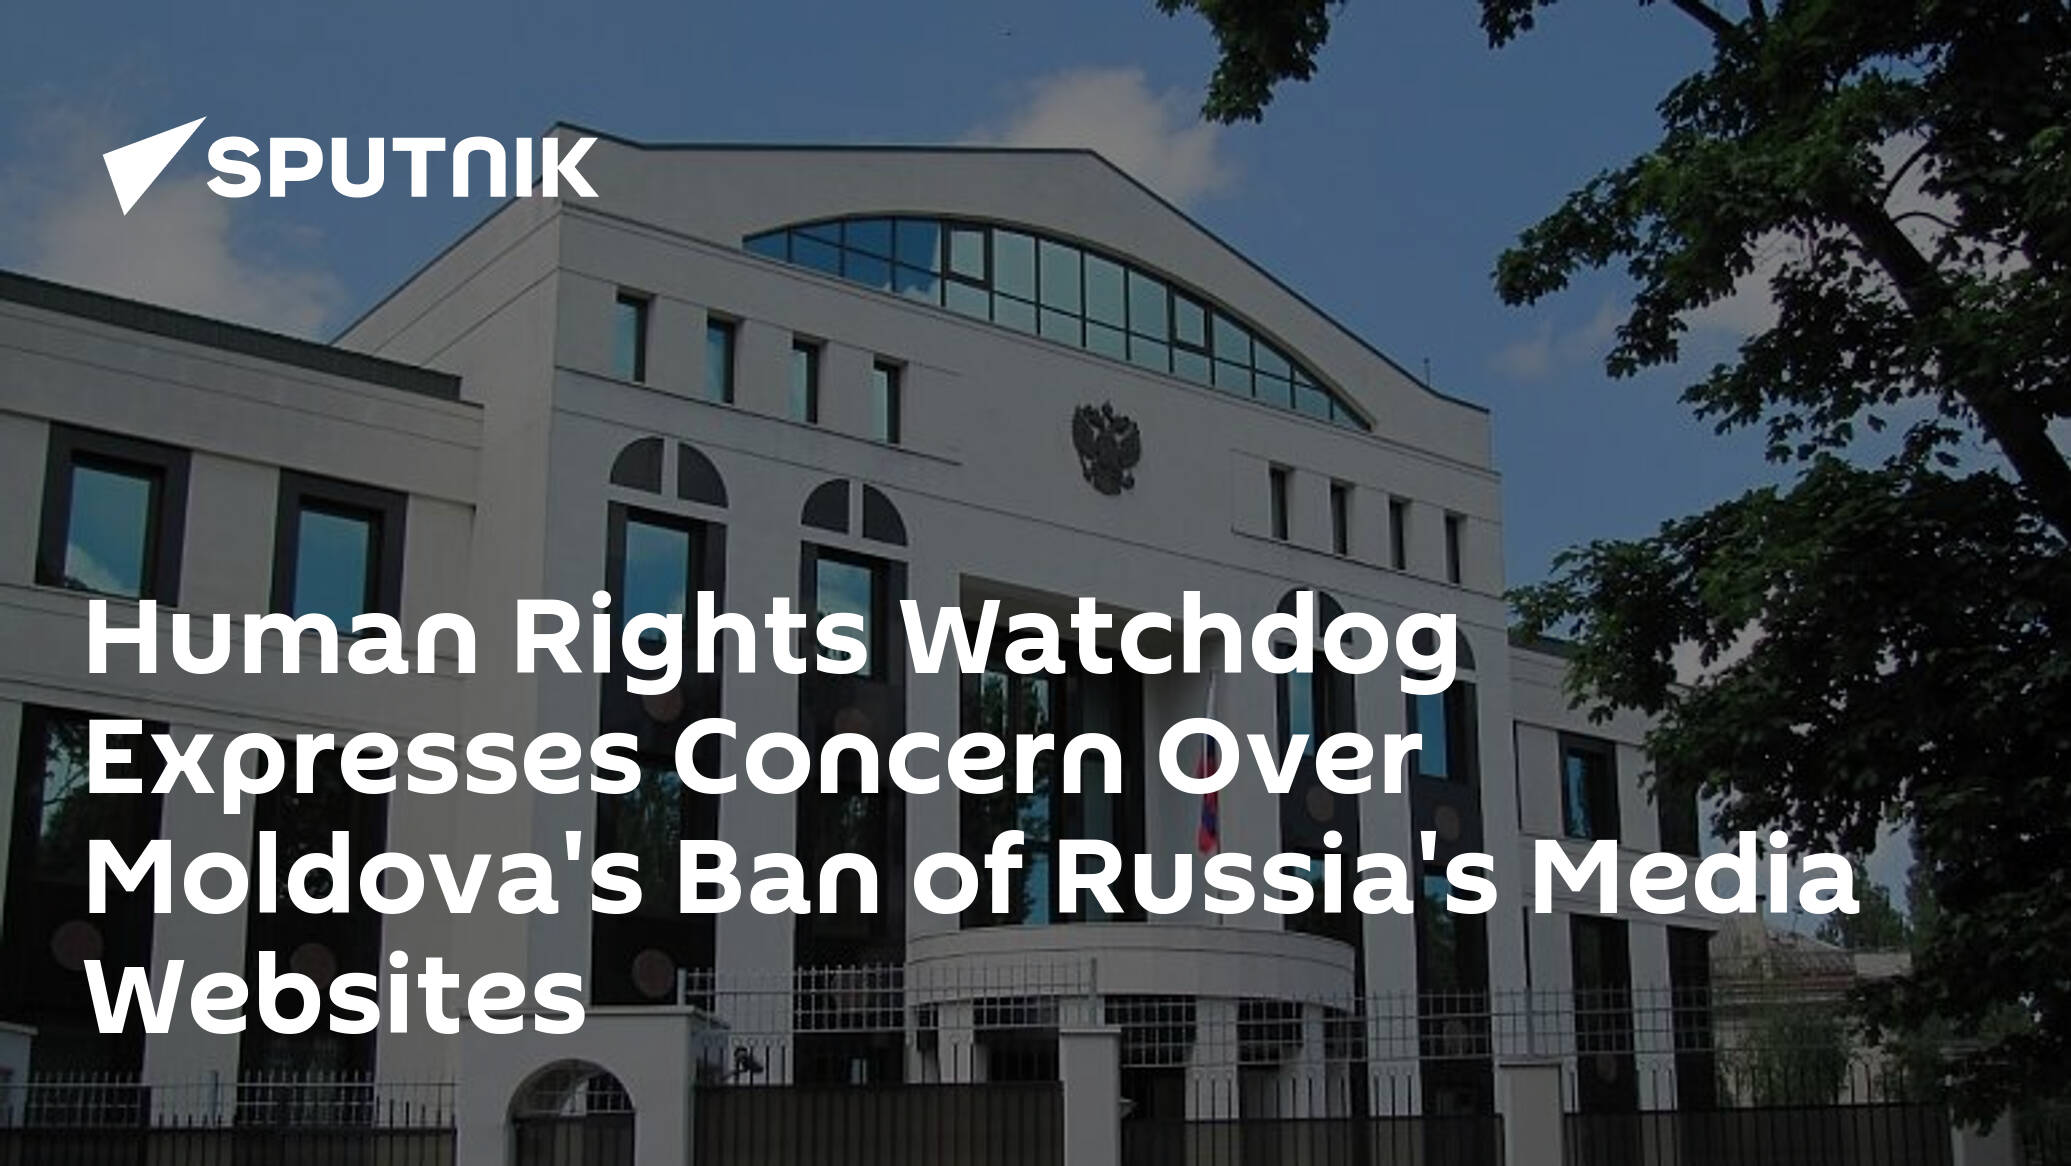 Human Rights Watchdog Expresses Concern Over Moldova's Ban of Russia's Media Websites